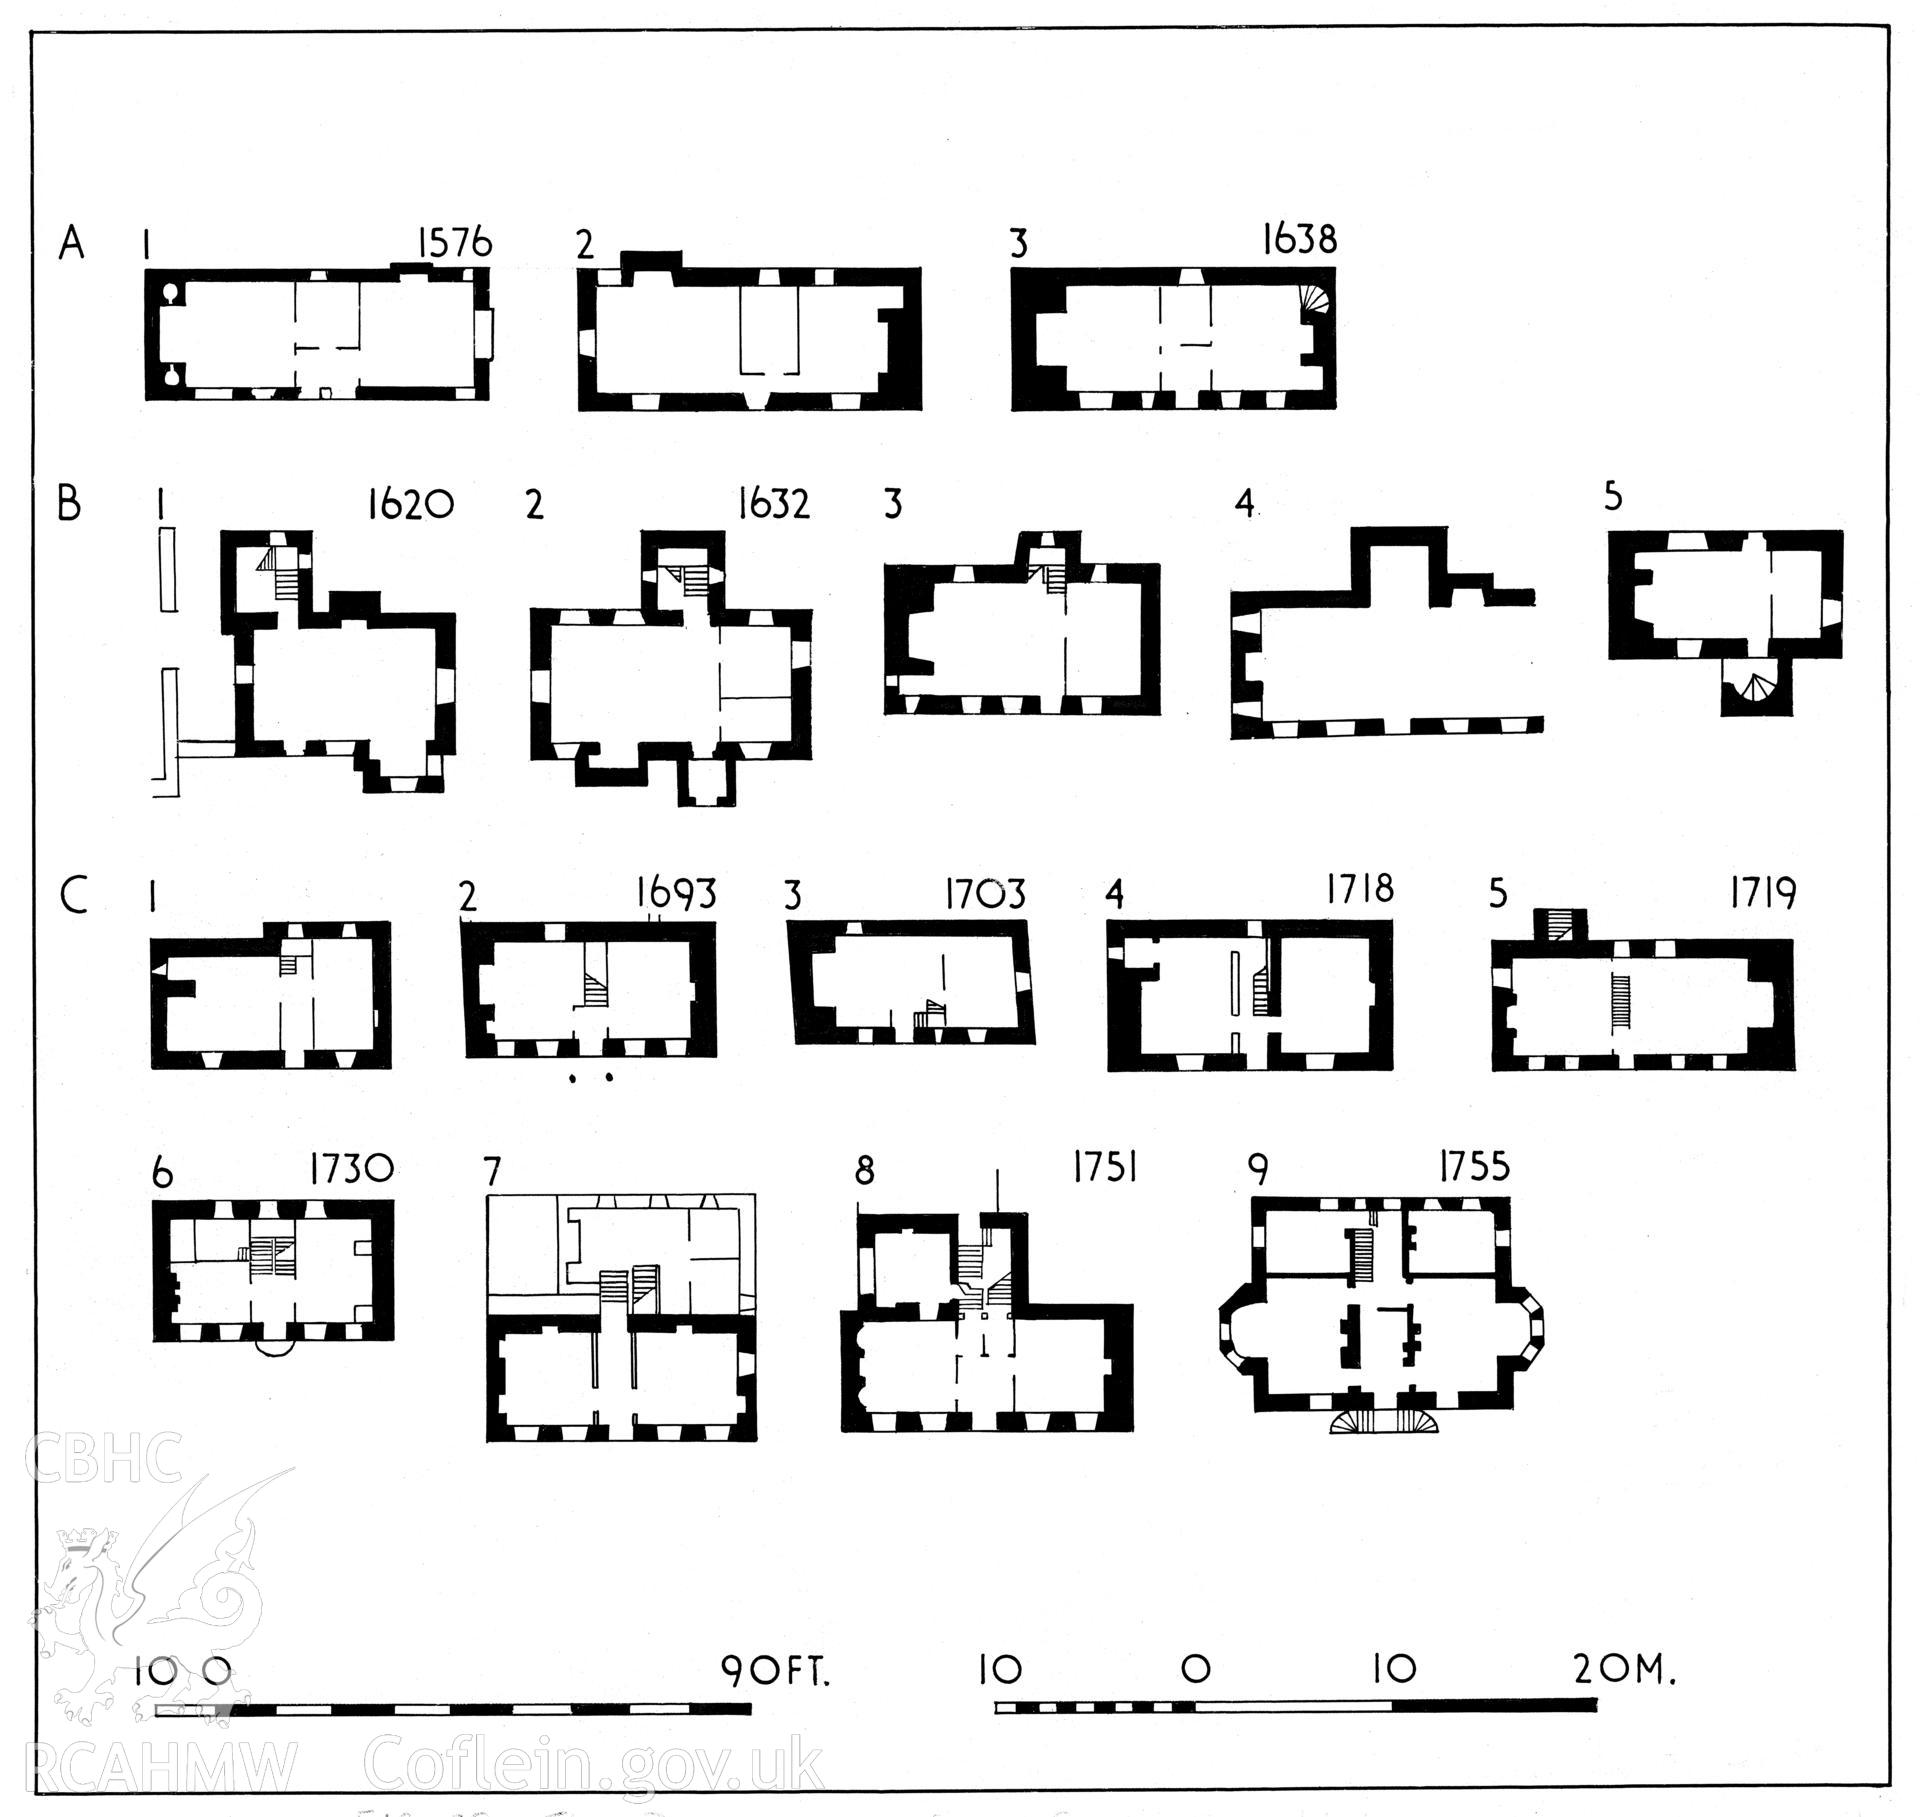 Multi-site RCAHMW drawing, 17 sites, (ink on linen) showing house plans, as published in Caerns Inventory vol III, fig 38.